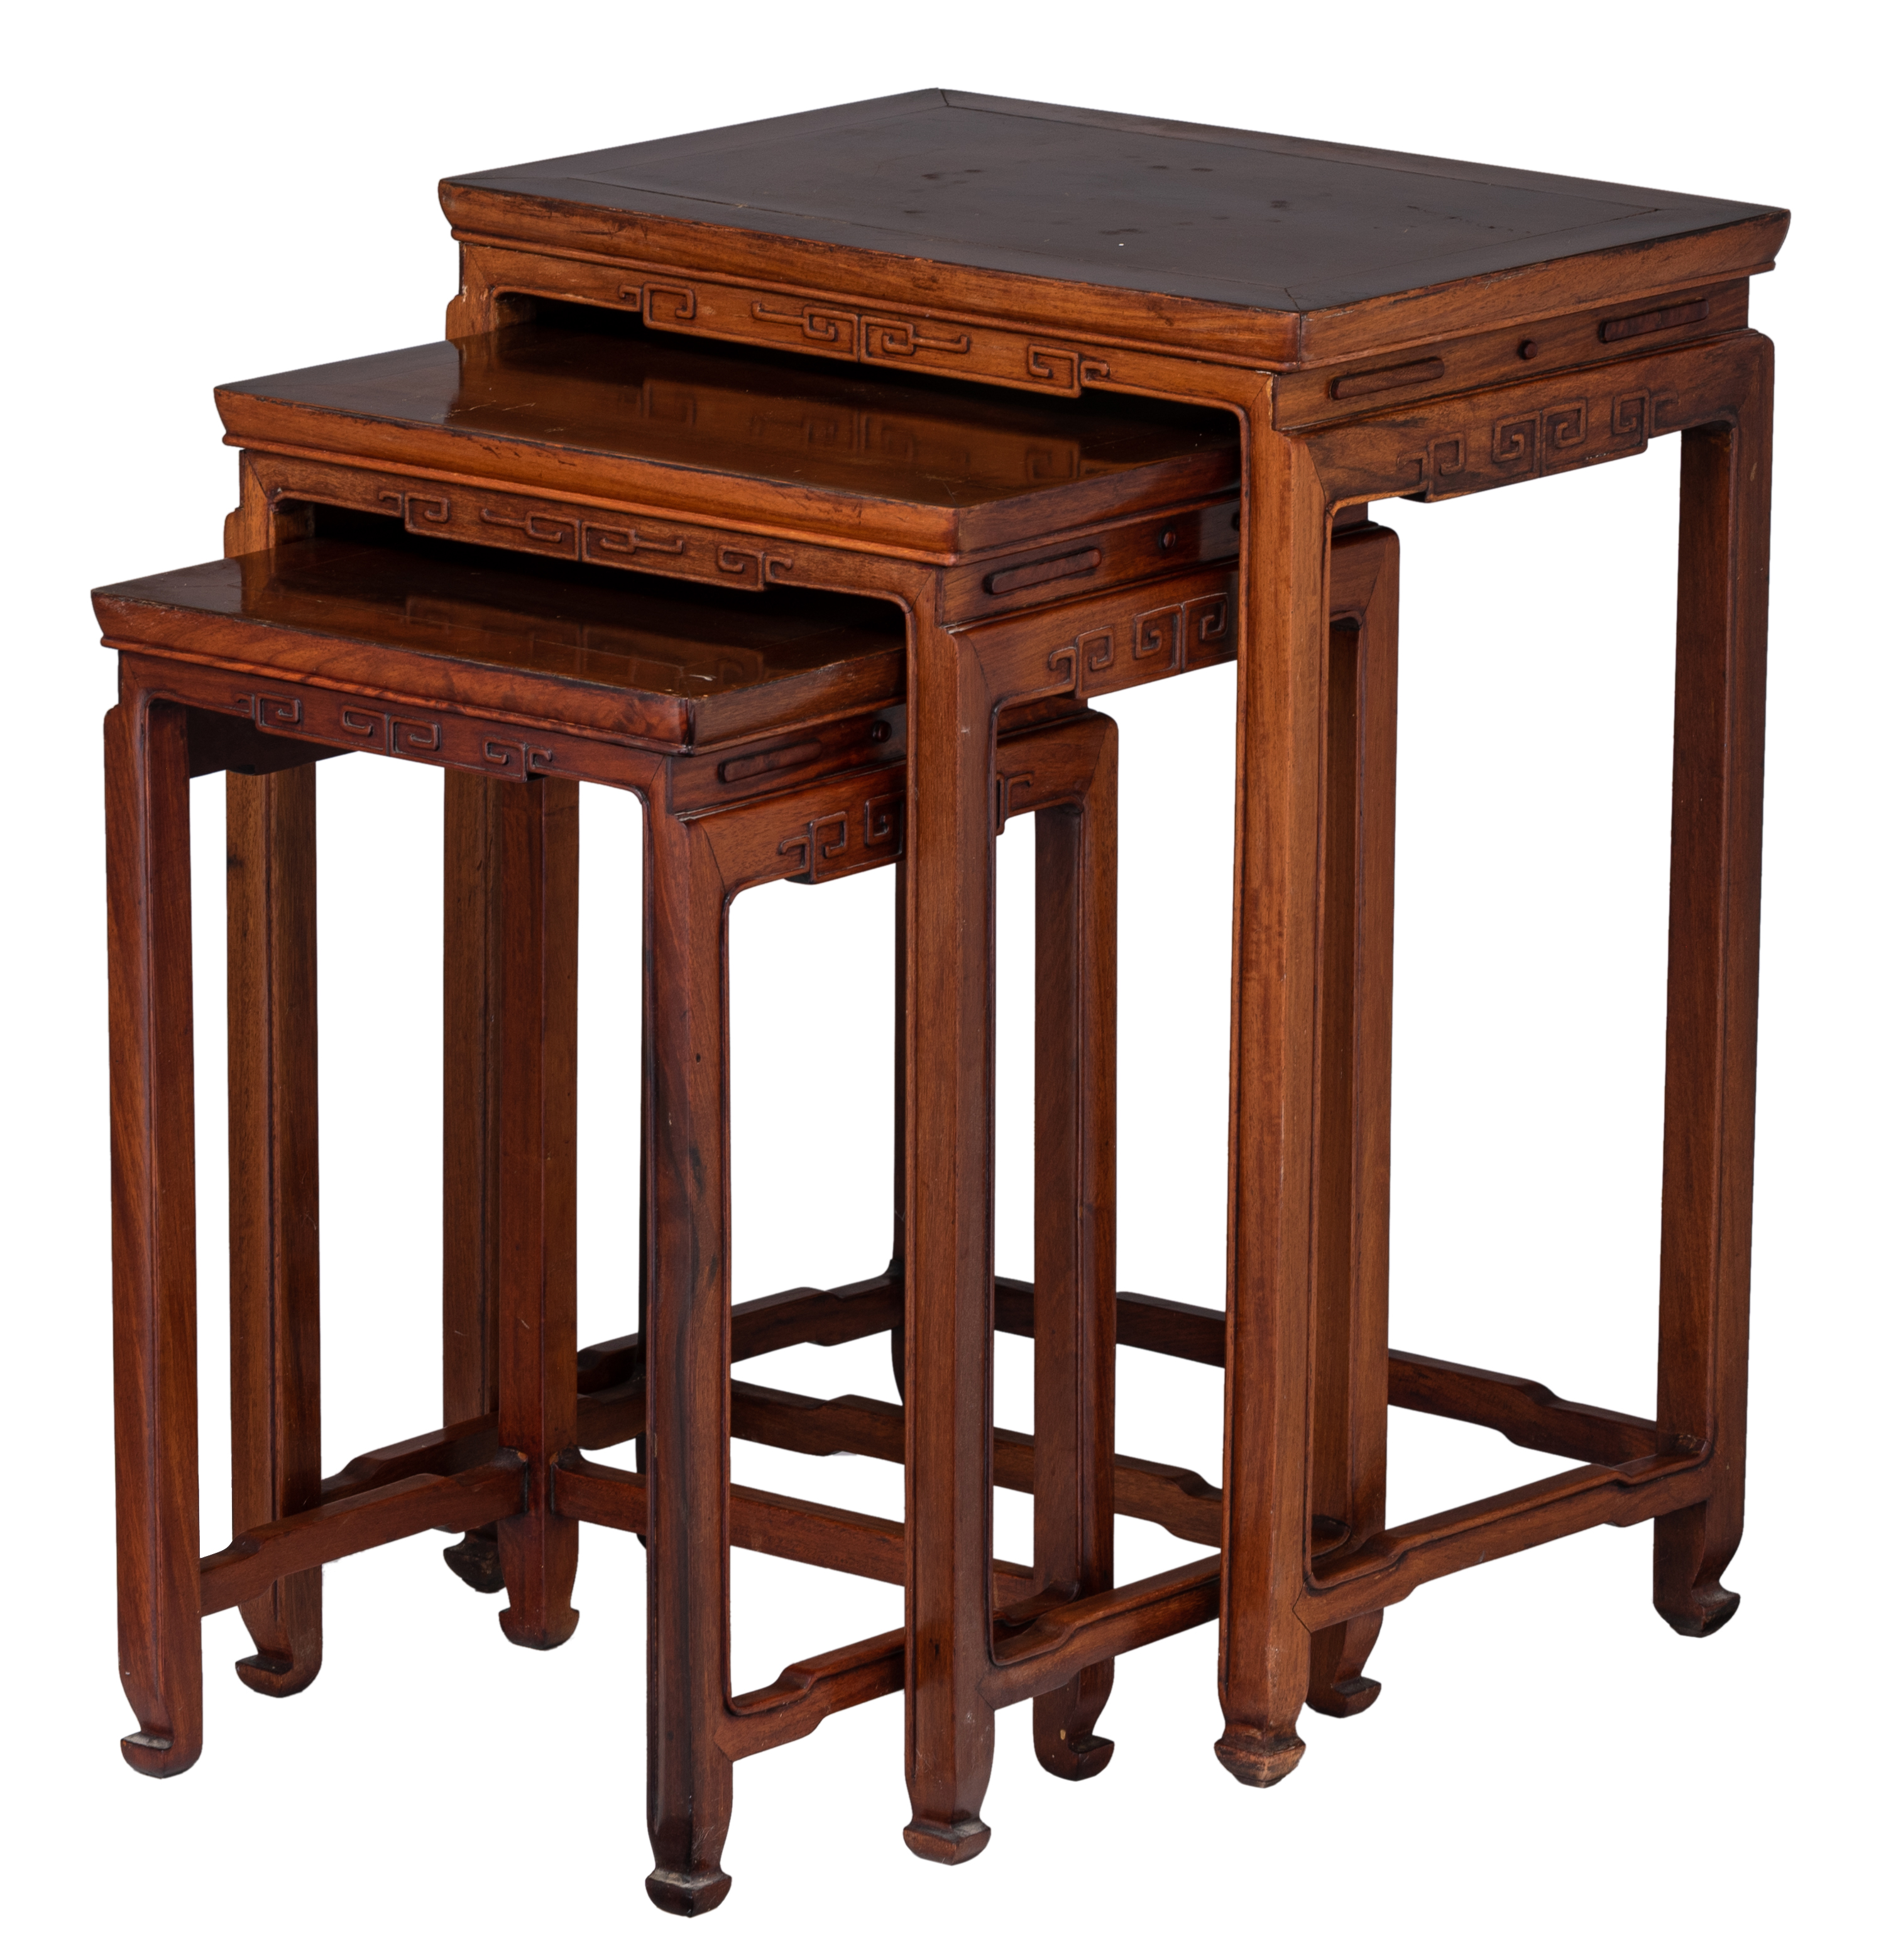 A set of three Chinese nesting tables, H 53,5 - 66,5 cm